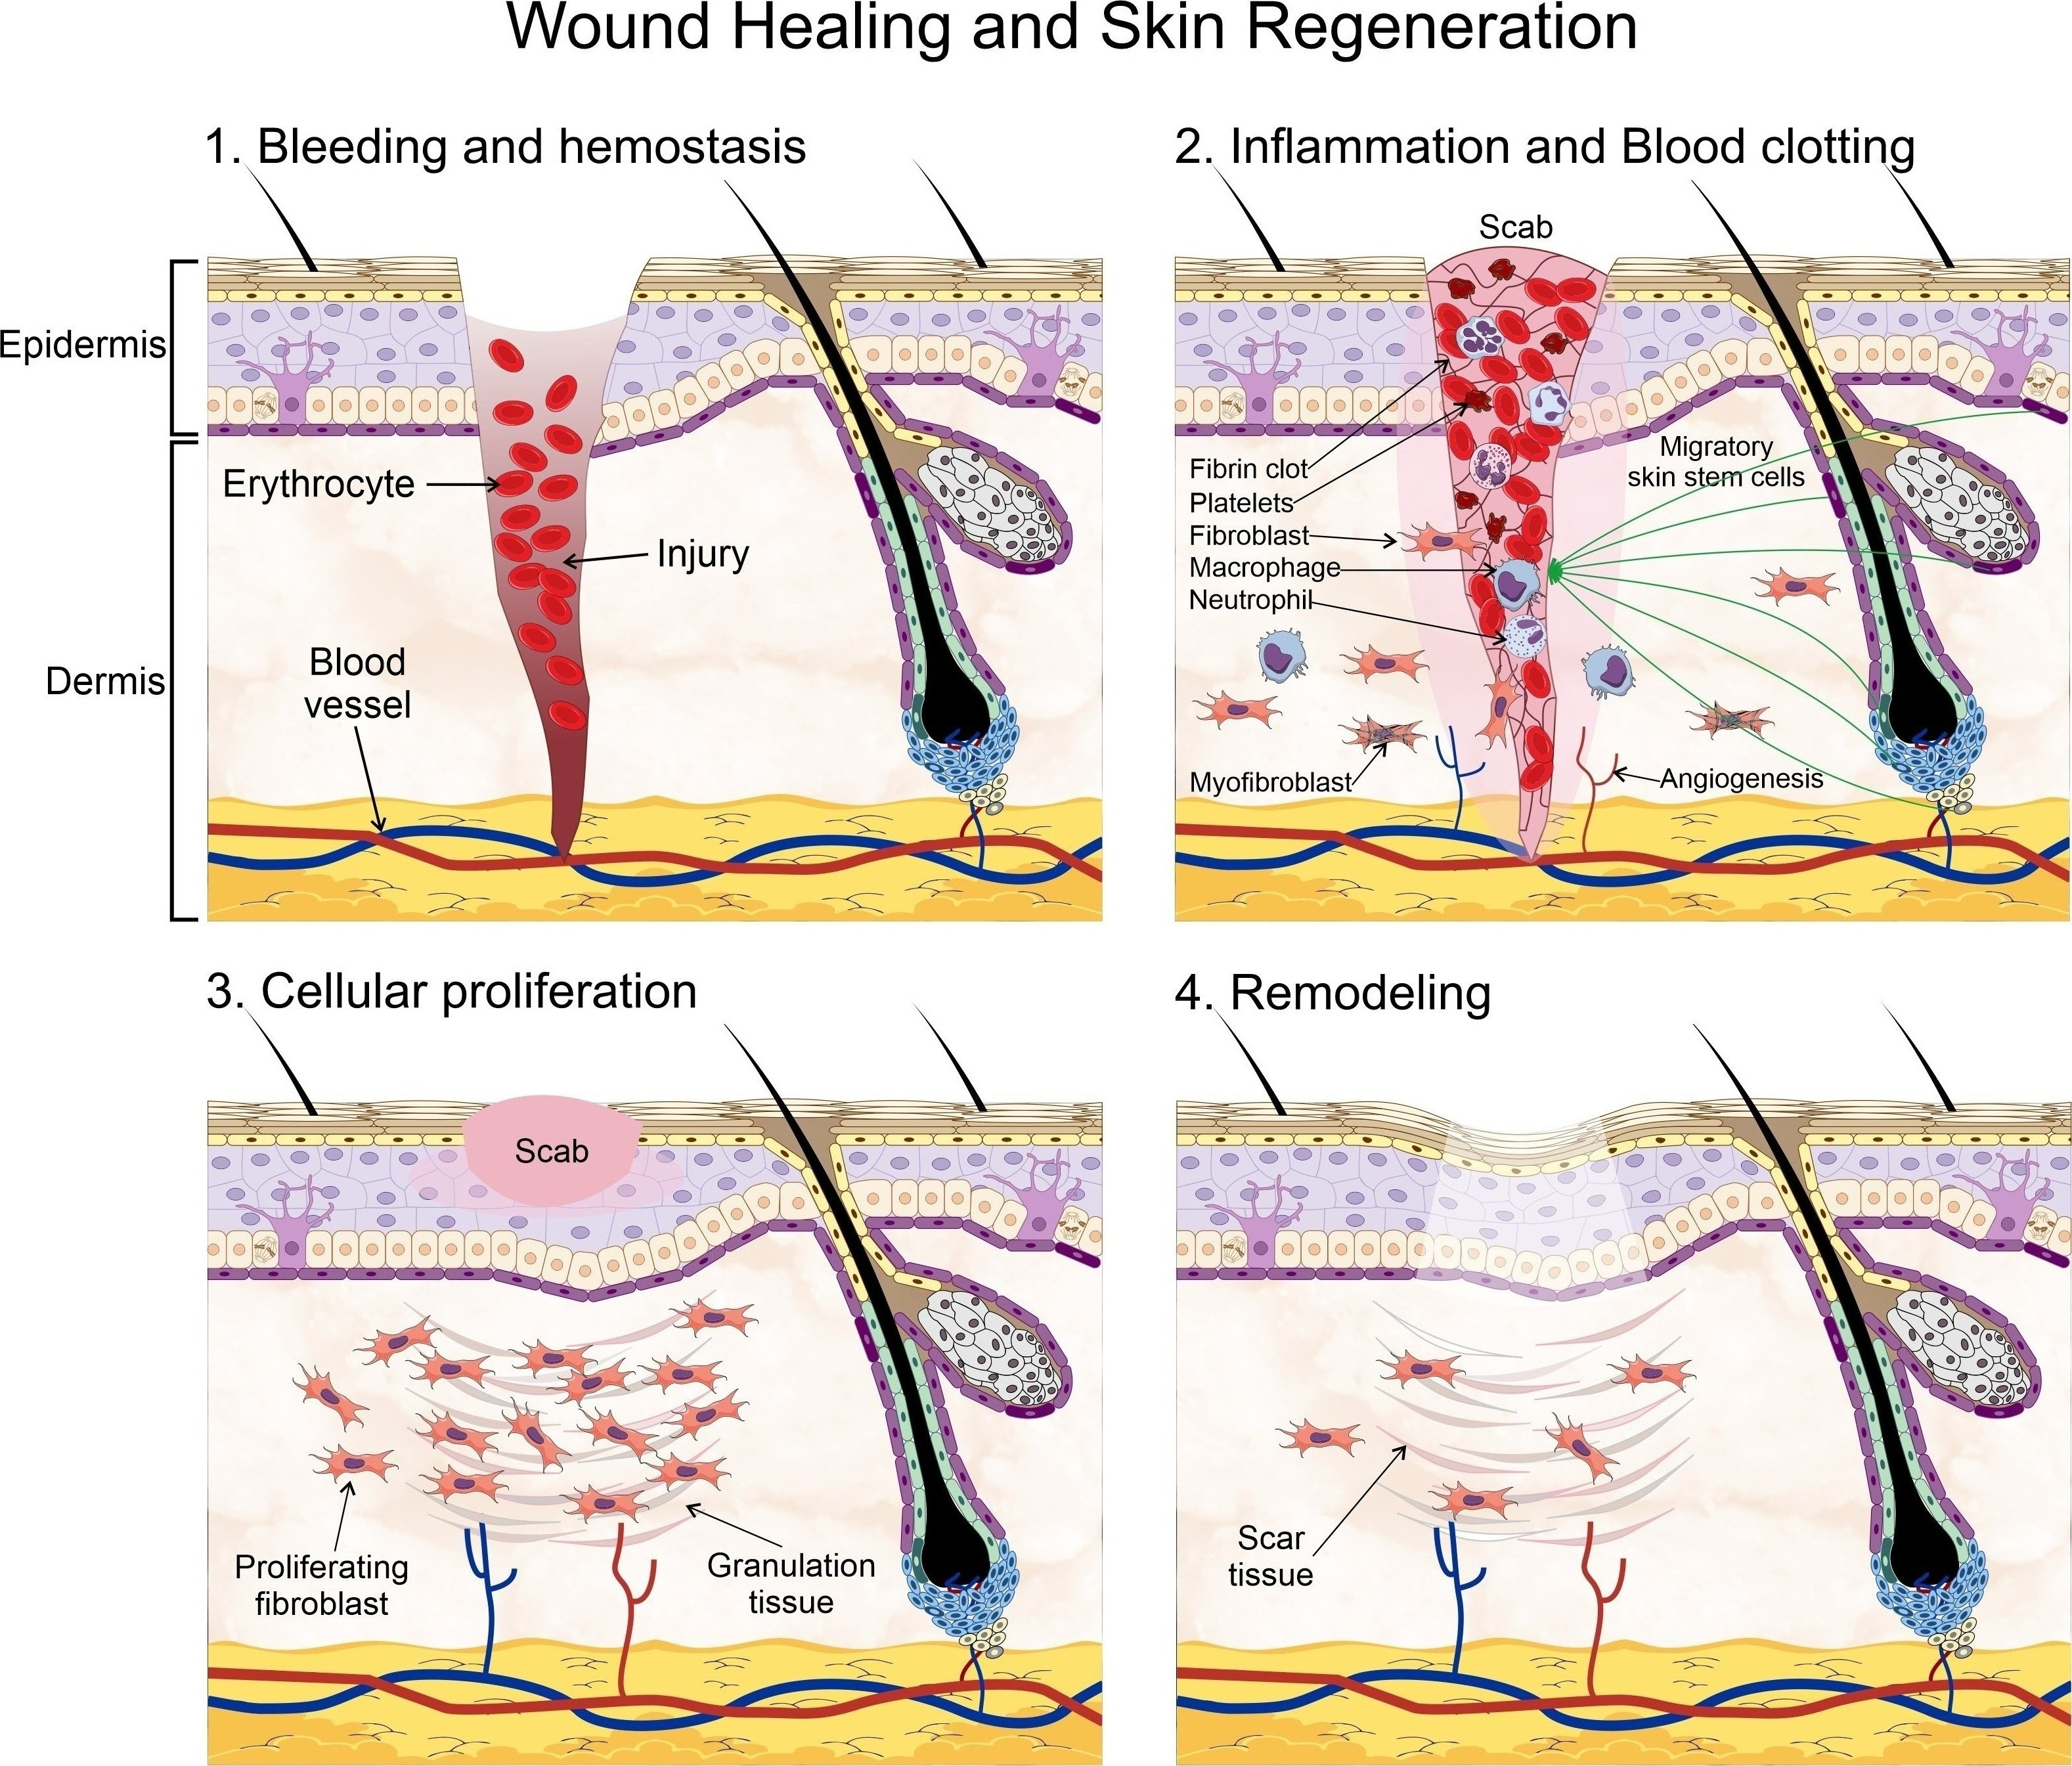 Wound healing process. Wound Healing and Skin Regeneration. Wound healing is a highly conserved mechanism that includes processes such as: 1. bleeding and hemostasis, in which blood flow slows and a clot forms to prevent blood loss during an injury, 2. Inflammation and blood clotting, in which the wound becomes sealed by fibrin which forms a temporary matrix occupied by immune cells whose task is to remove dead tissue and control infection, fibroblasts are then recruited into the site of the injury and promote angiogenesis and the recruitment of fibroblast-derived myofibro-blasts, which contract the wound area. Skin stem cells are mobilized into the site of injury at this stage to begin the pro-cess of re-epithelialization starting from the edge of the wound, 3. Cellular proliferation, in which the recruited fibro-blasts secrete collagen, and form granulation tissue, a scab is formed on the site of injury, and 4. Extracellular matrix (ECM) remodeling, in which new ECM components are secreted by both fibroblasts and epidermal keratinocytes, which also remodel the matrix through the expression of matrix metalloproteinases. Some elements of this figure were taken from the Mind the Graph platform, available at www.mindthegraph.com